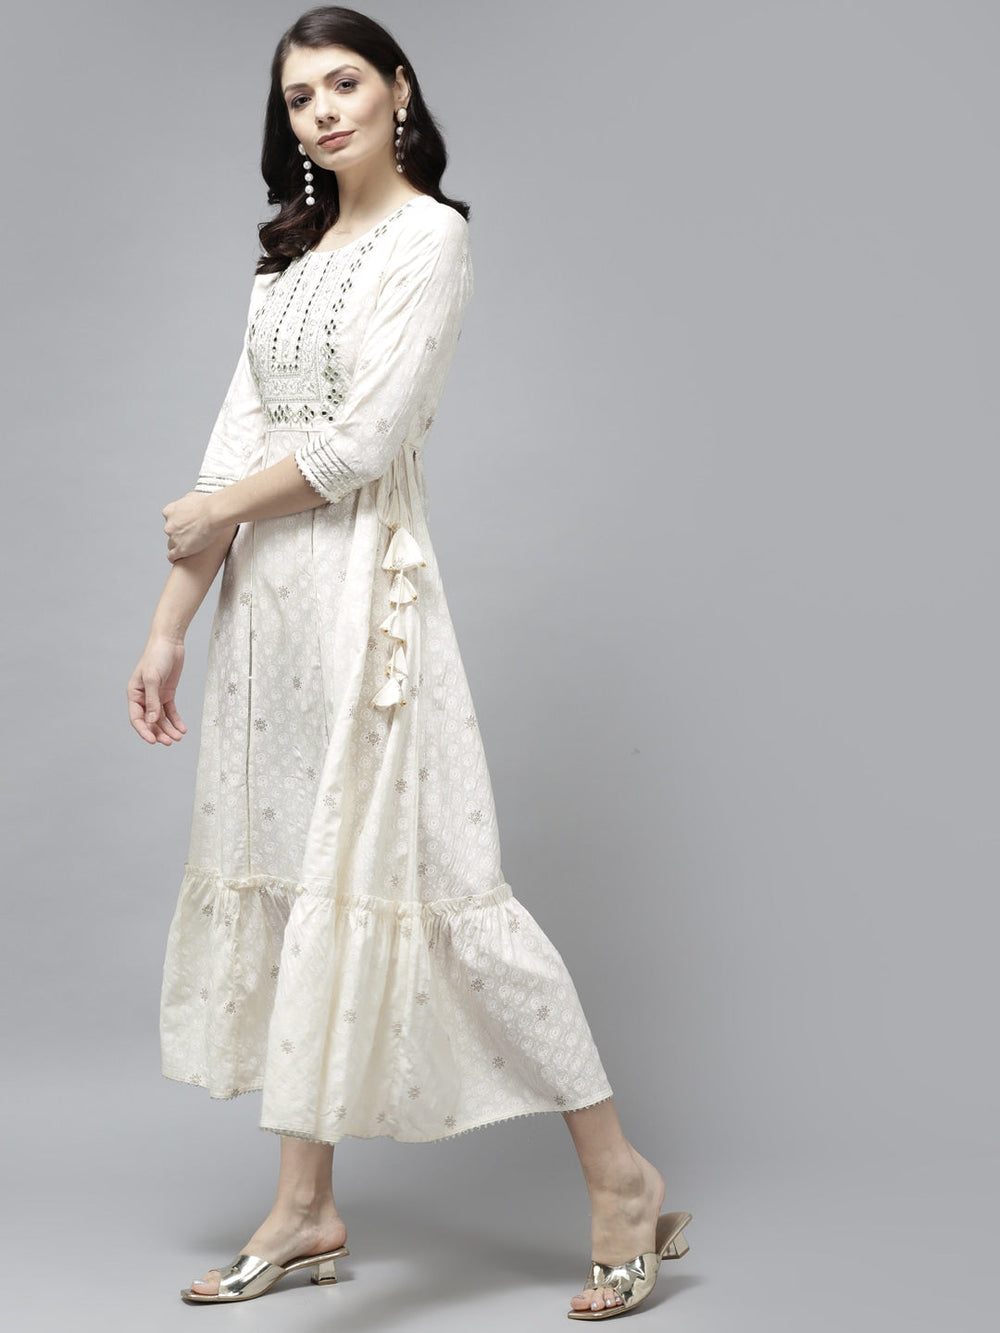 White Embroidered Dress-Yufta Store-5807DRSWHS